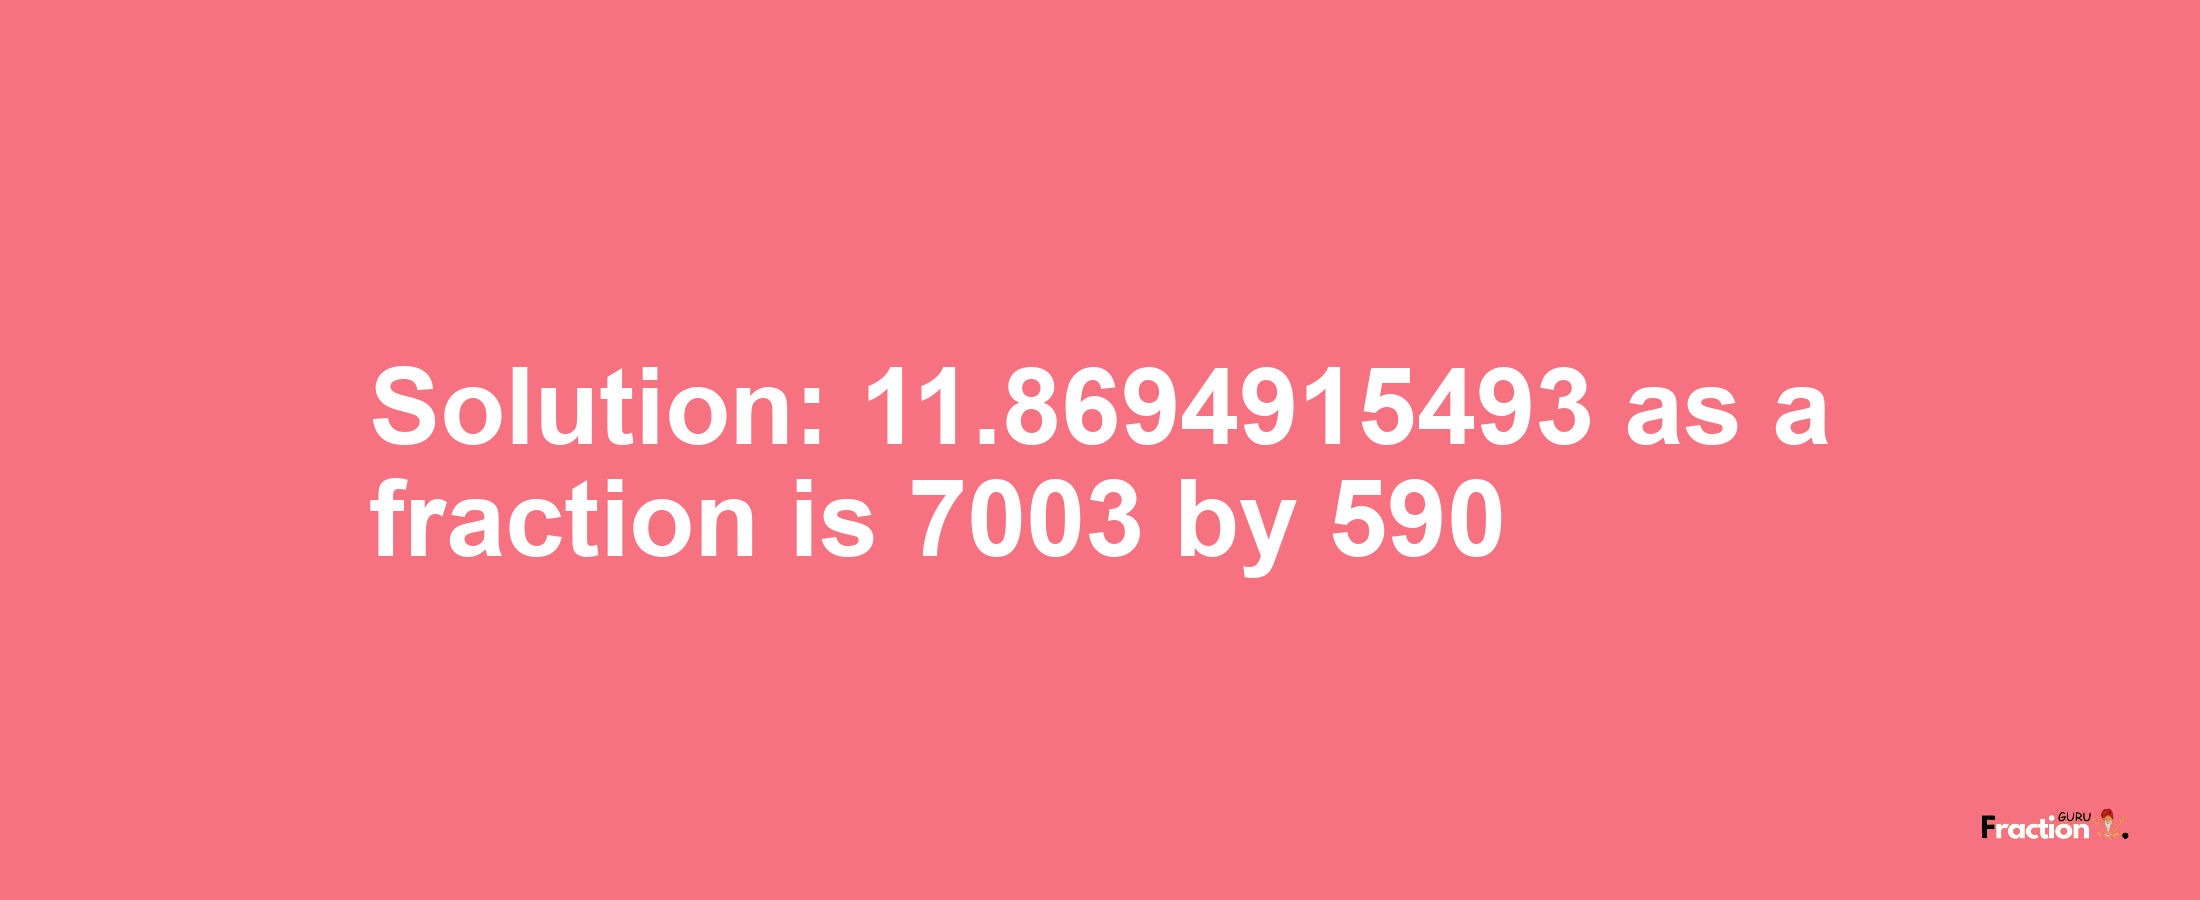 Solution:11.8694915493 as a fraction is 7003/590